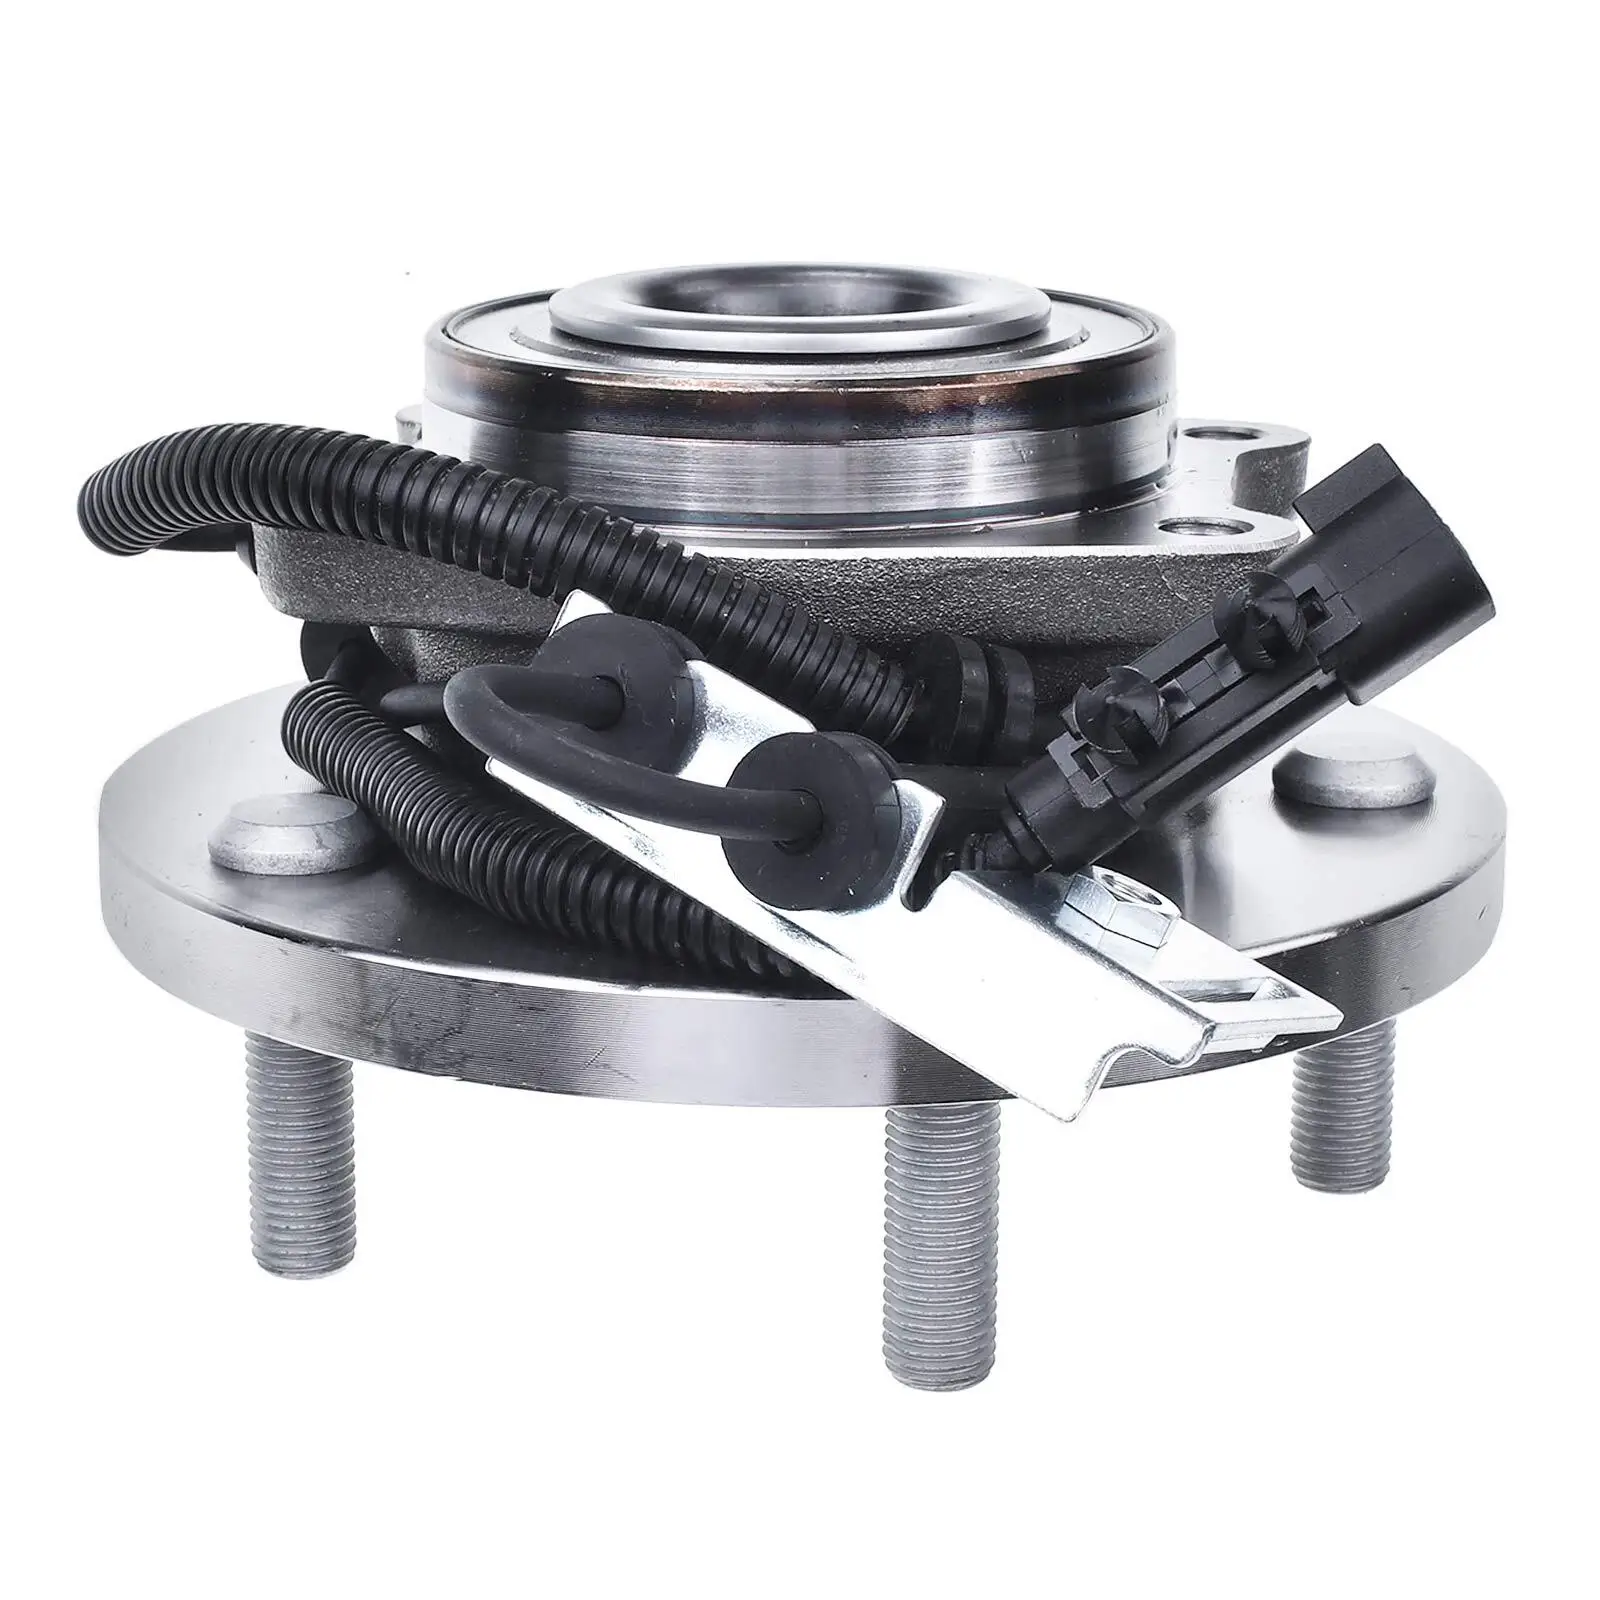 

A3 Wholesales 2x Front LH RH Wheel Hub Bearing Assembly for Chrysler Town & Country Dodge VW